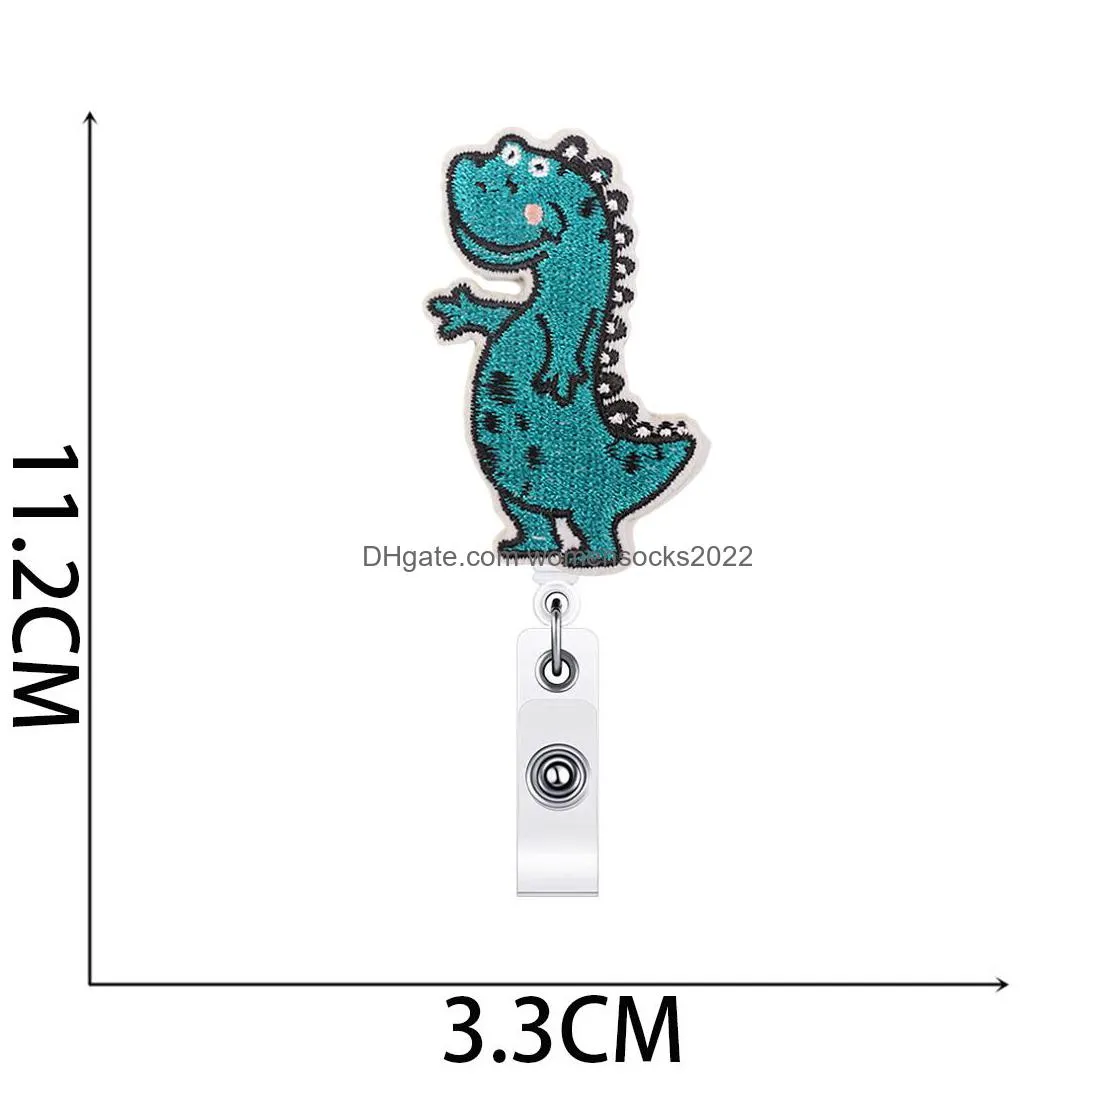 notions dinosaur emboridered retractable badge reels holder with alloy alligator clip cute cartoon animal id card decorative badge name tag